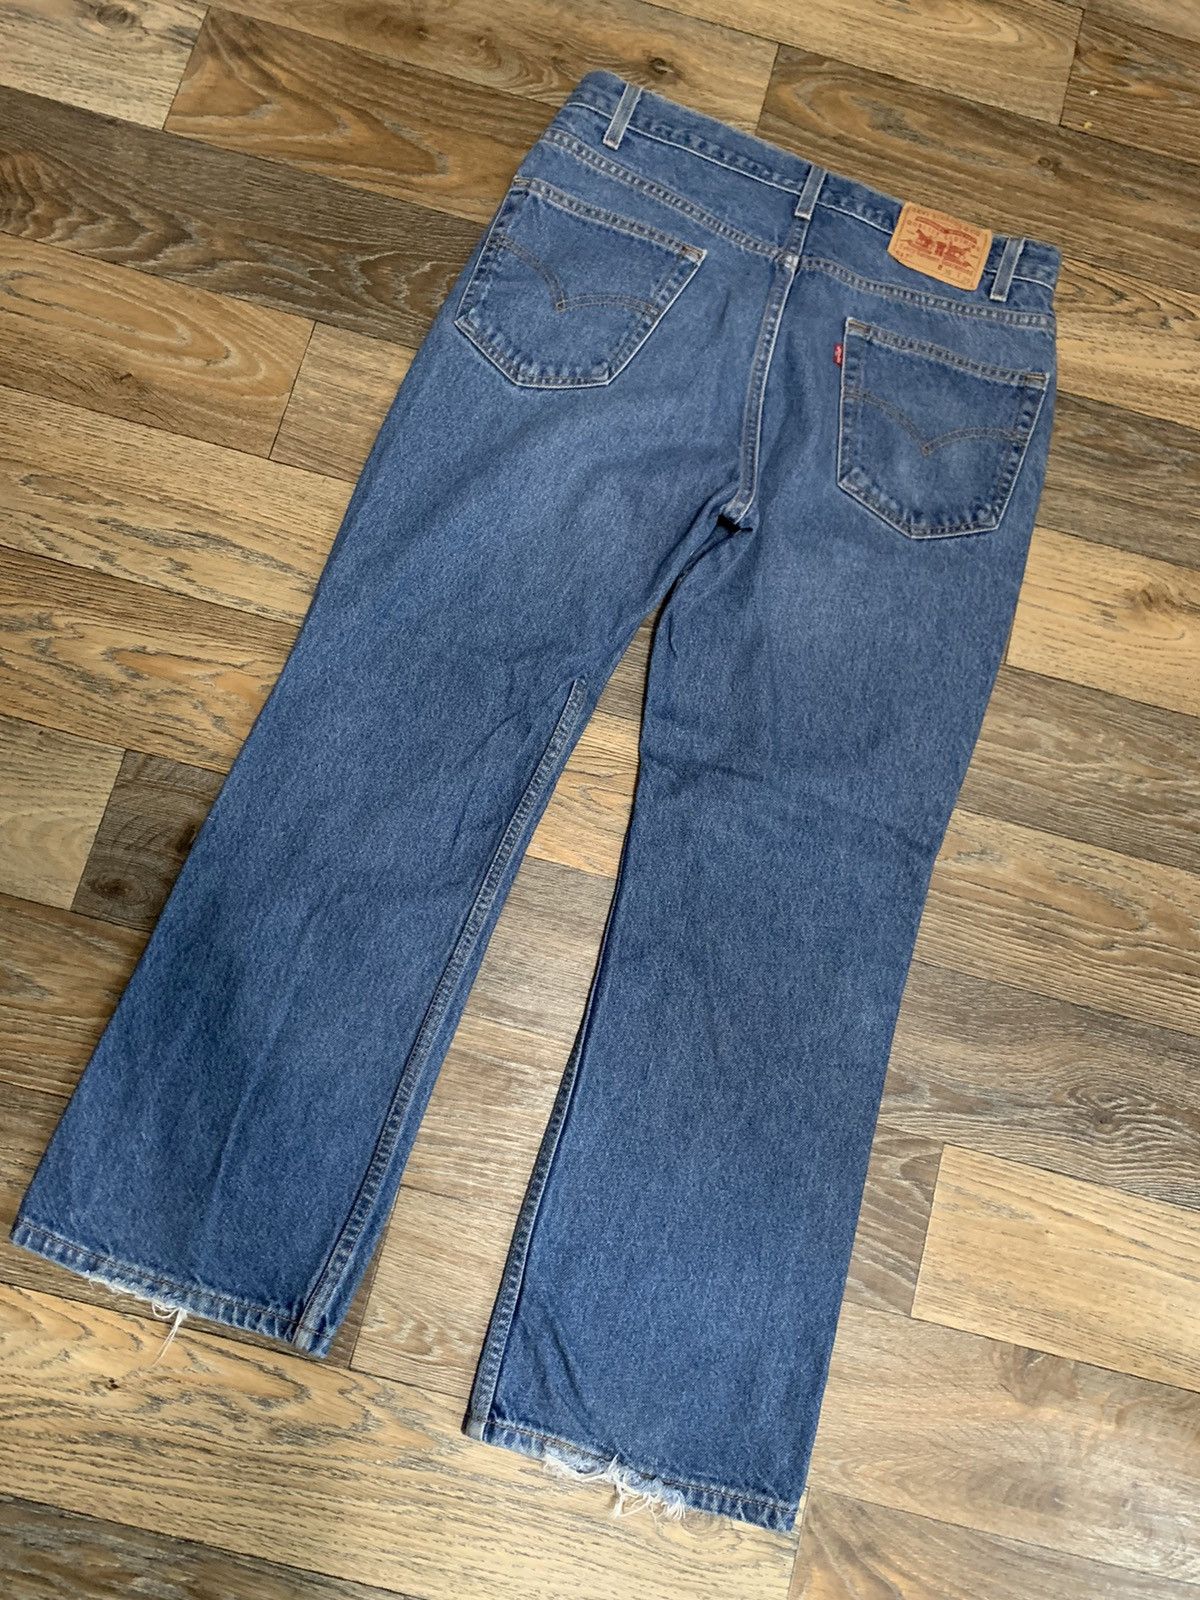 Vintage Vintage Levi’s 517 Jeans Made in USA 35x29 | Grailed